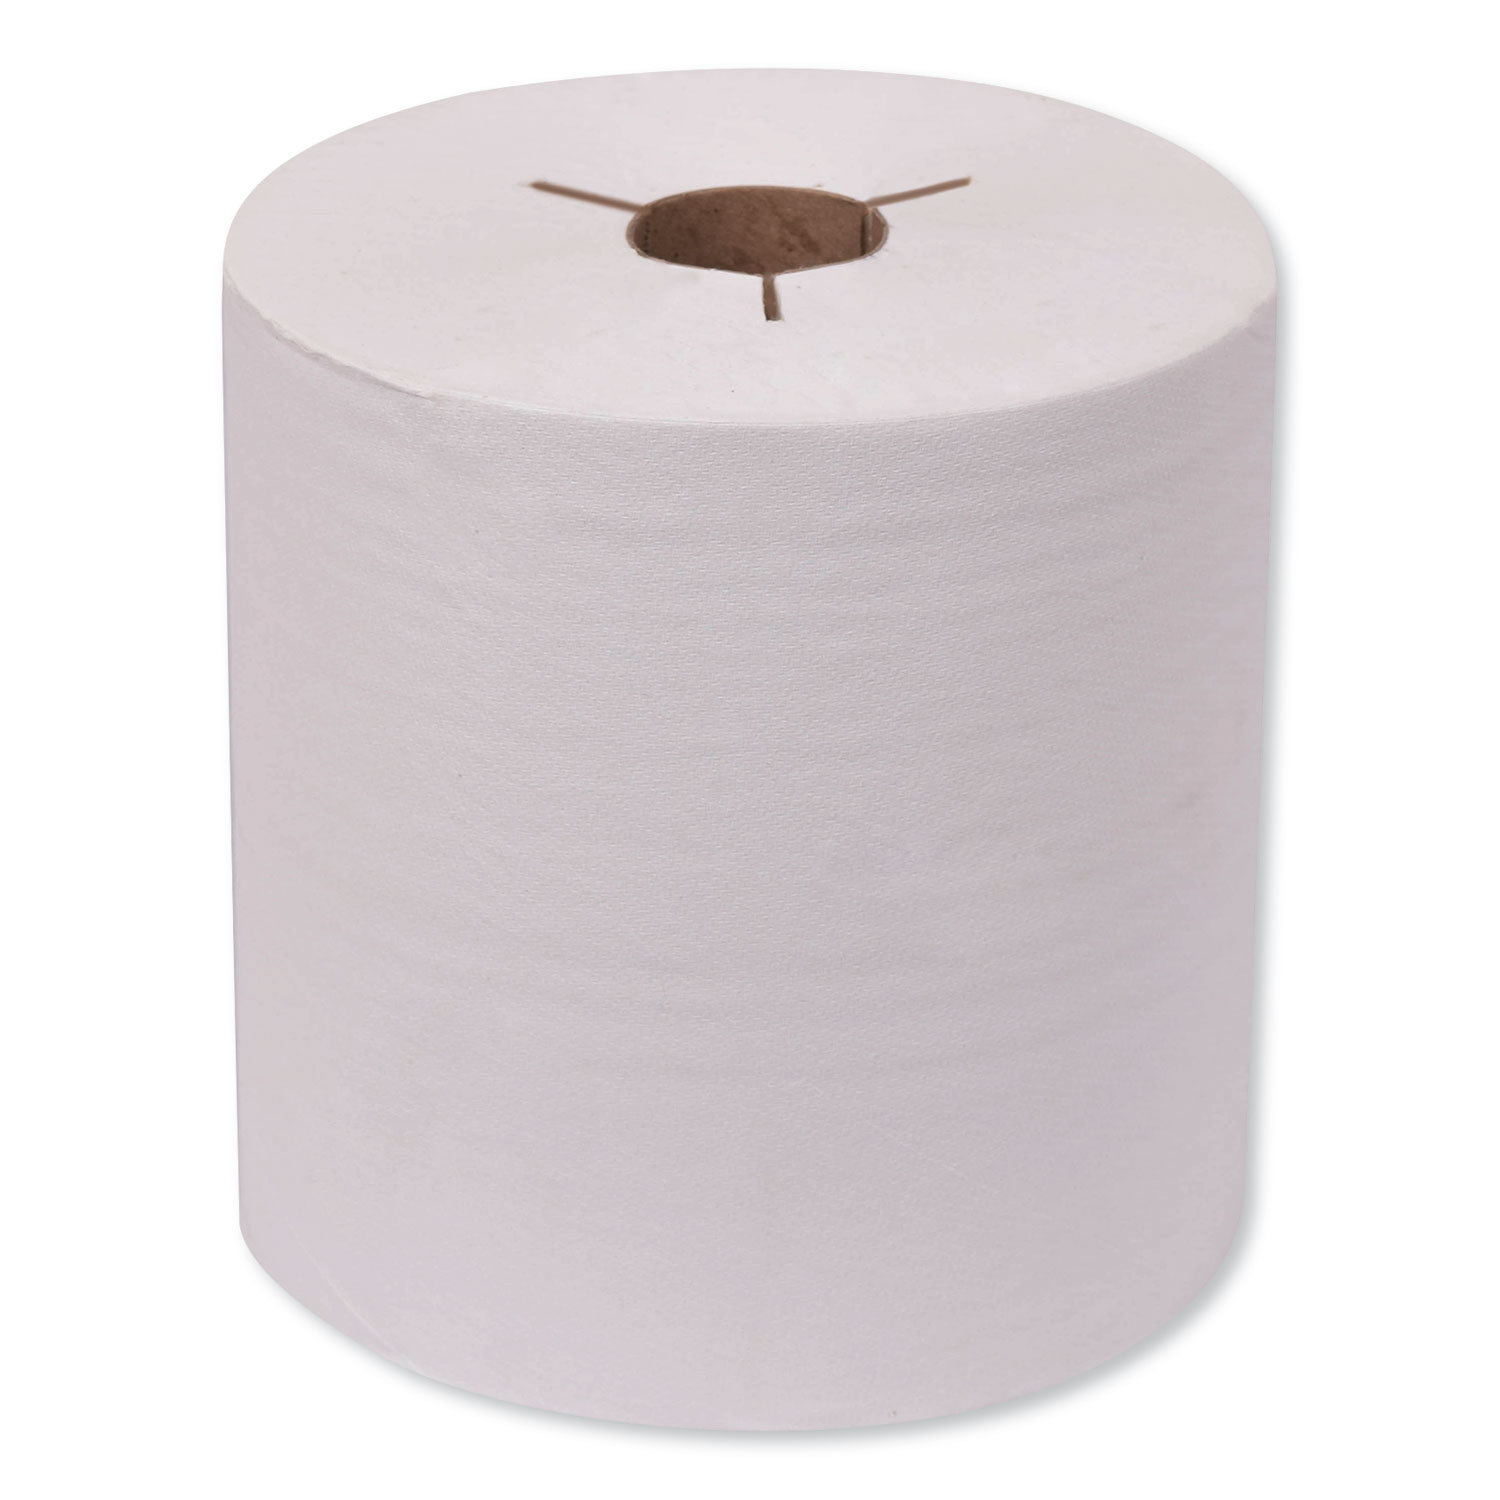  Tork 8031400 Universal Hand Towel Roll, Notched, 8 x 800 ft, Natural White, 6 Rolls/Carton (TRK8031400) 